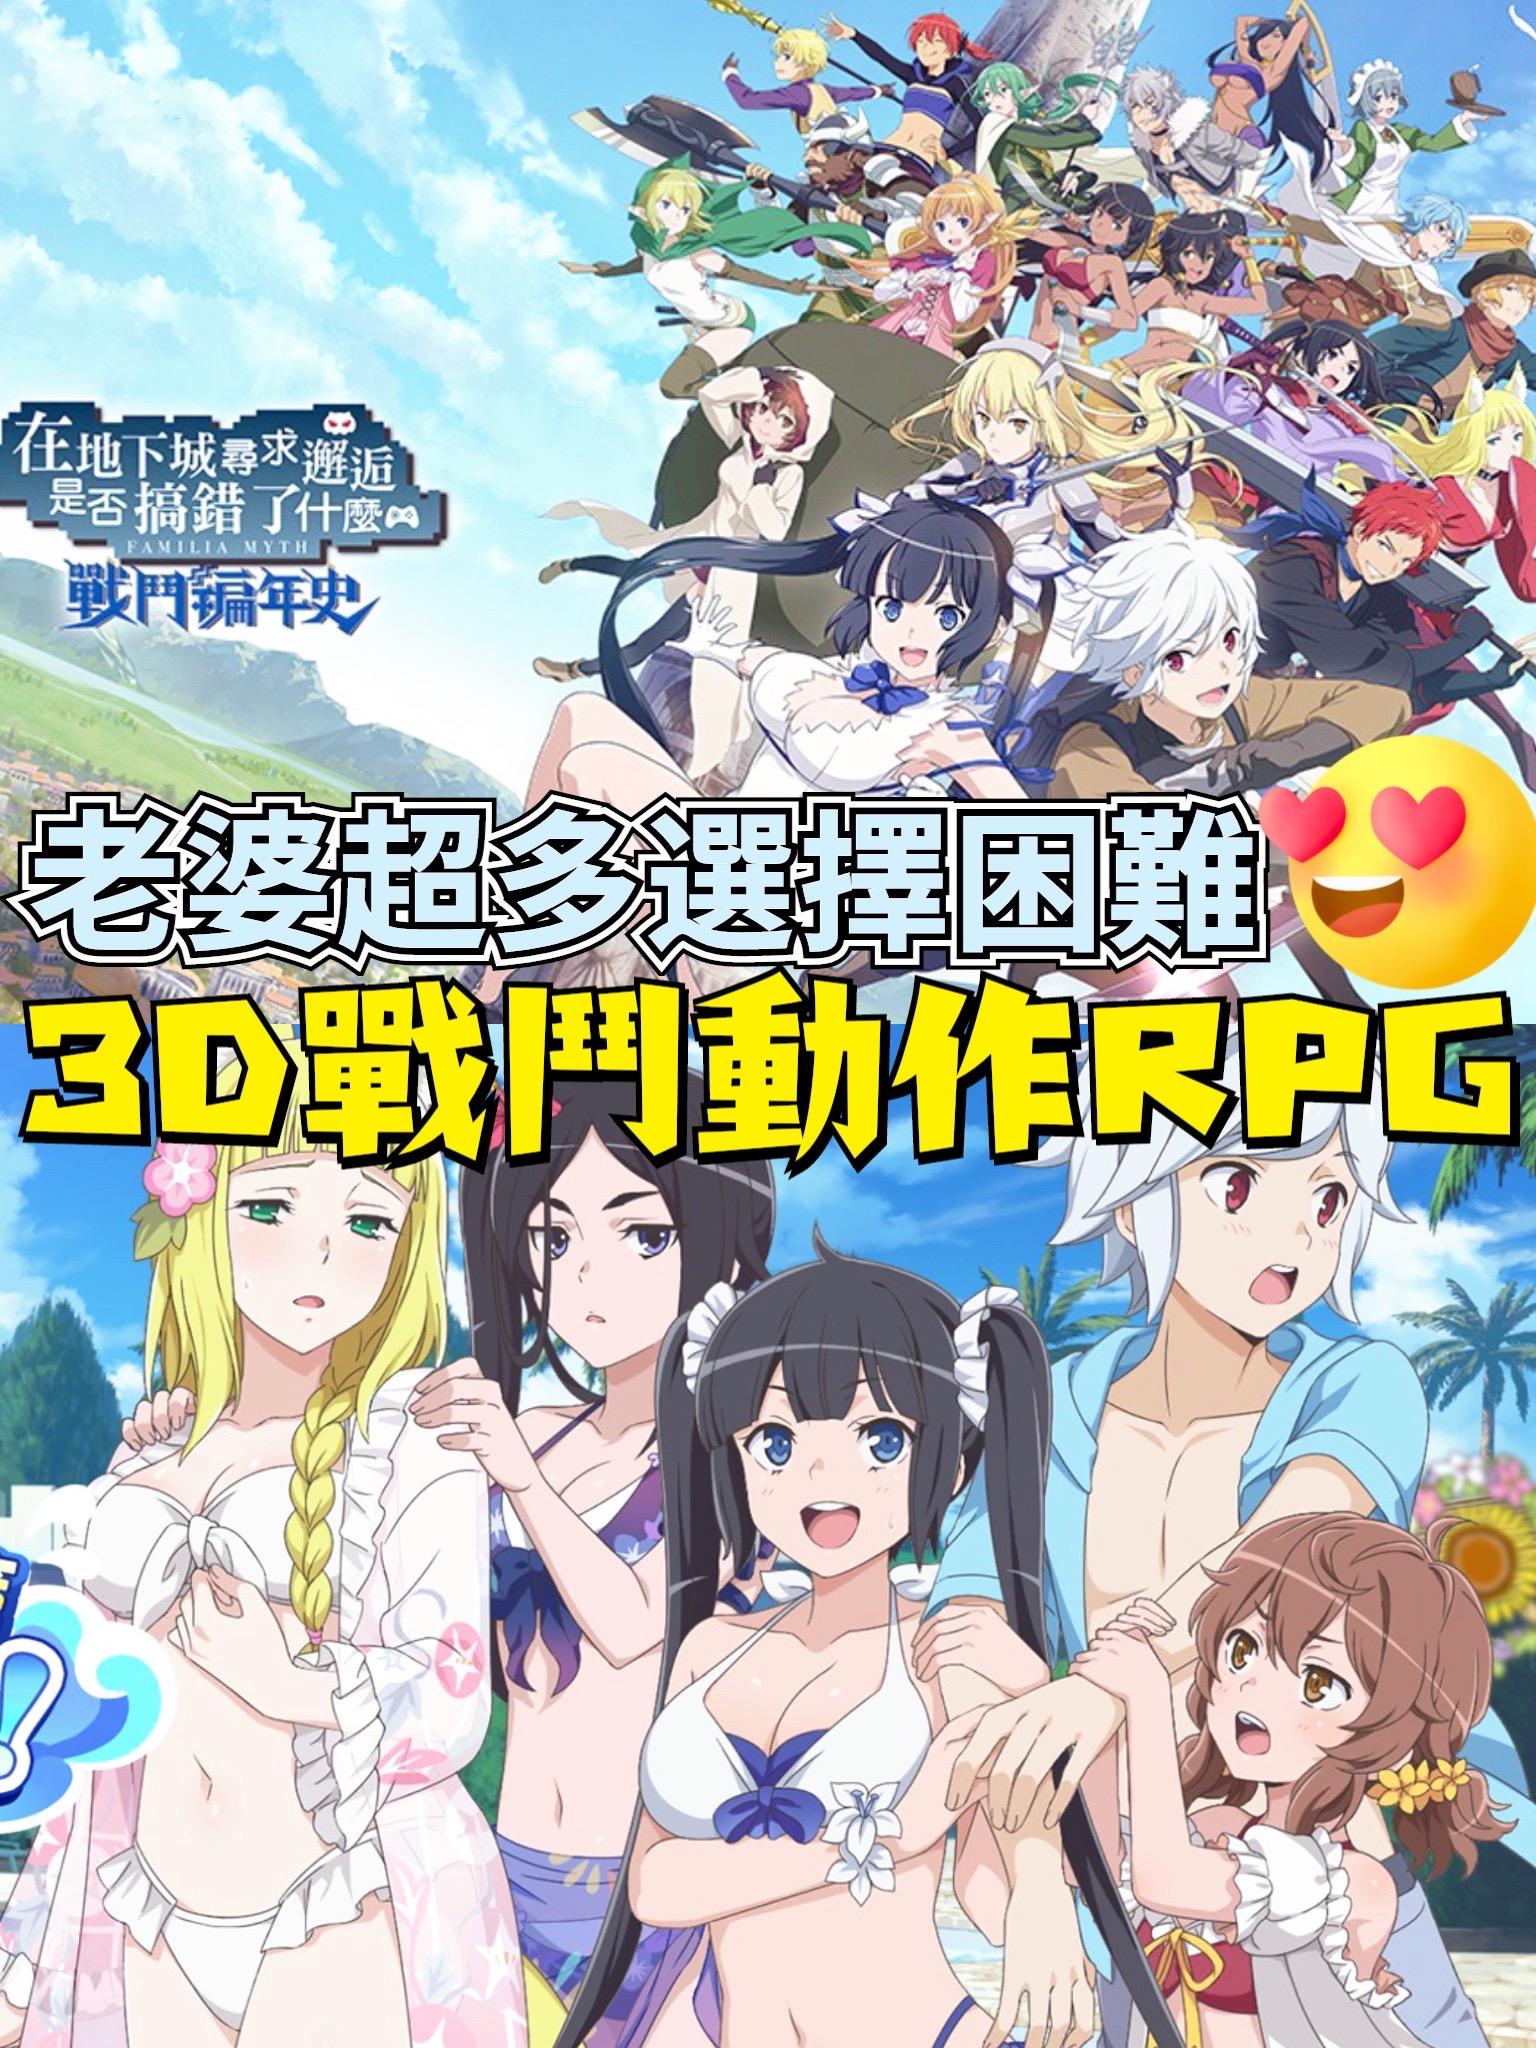 The DanMachi Mobile ARPG Adaptation Is Up For Pre-Registration